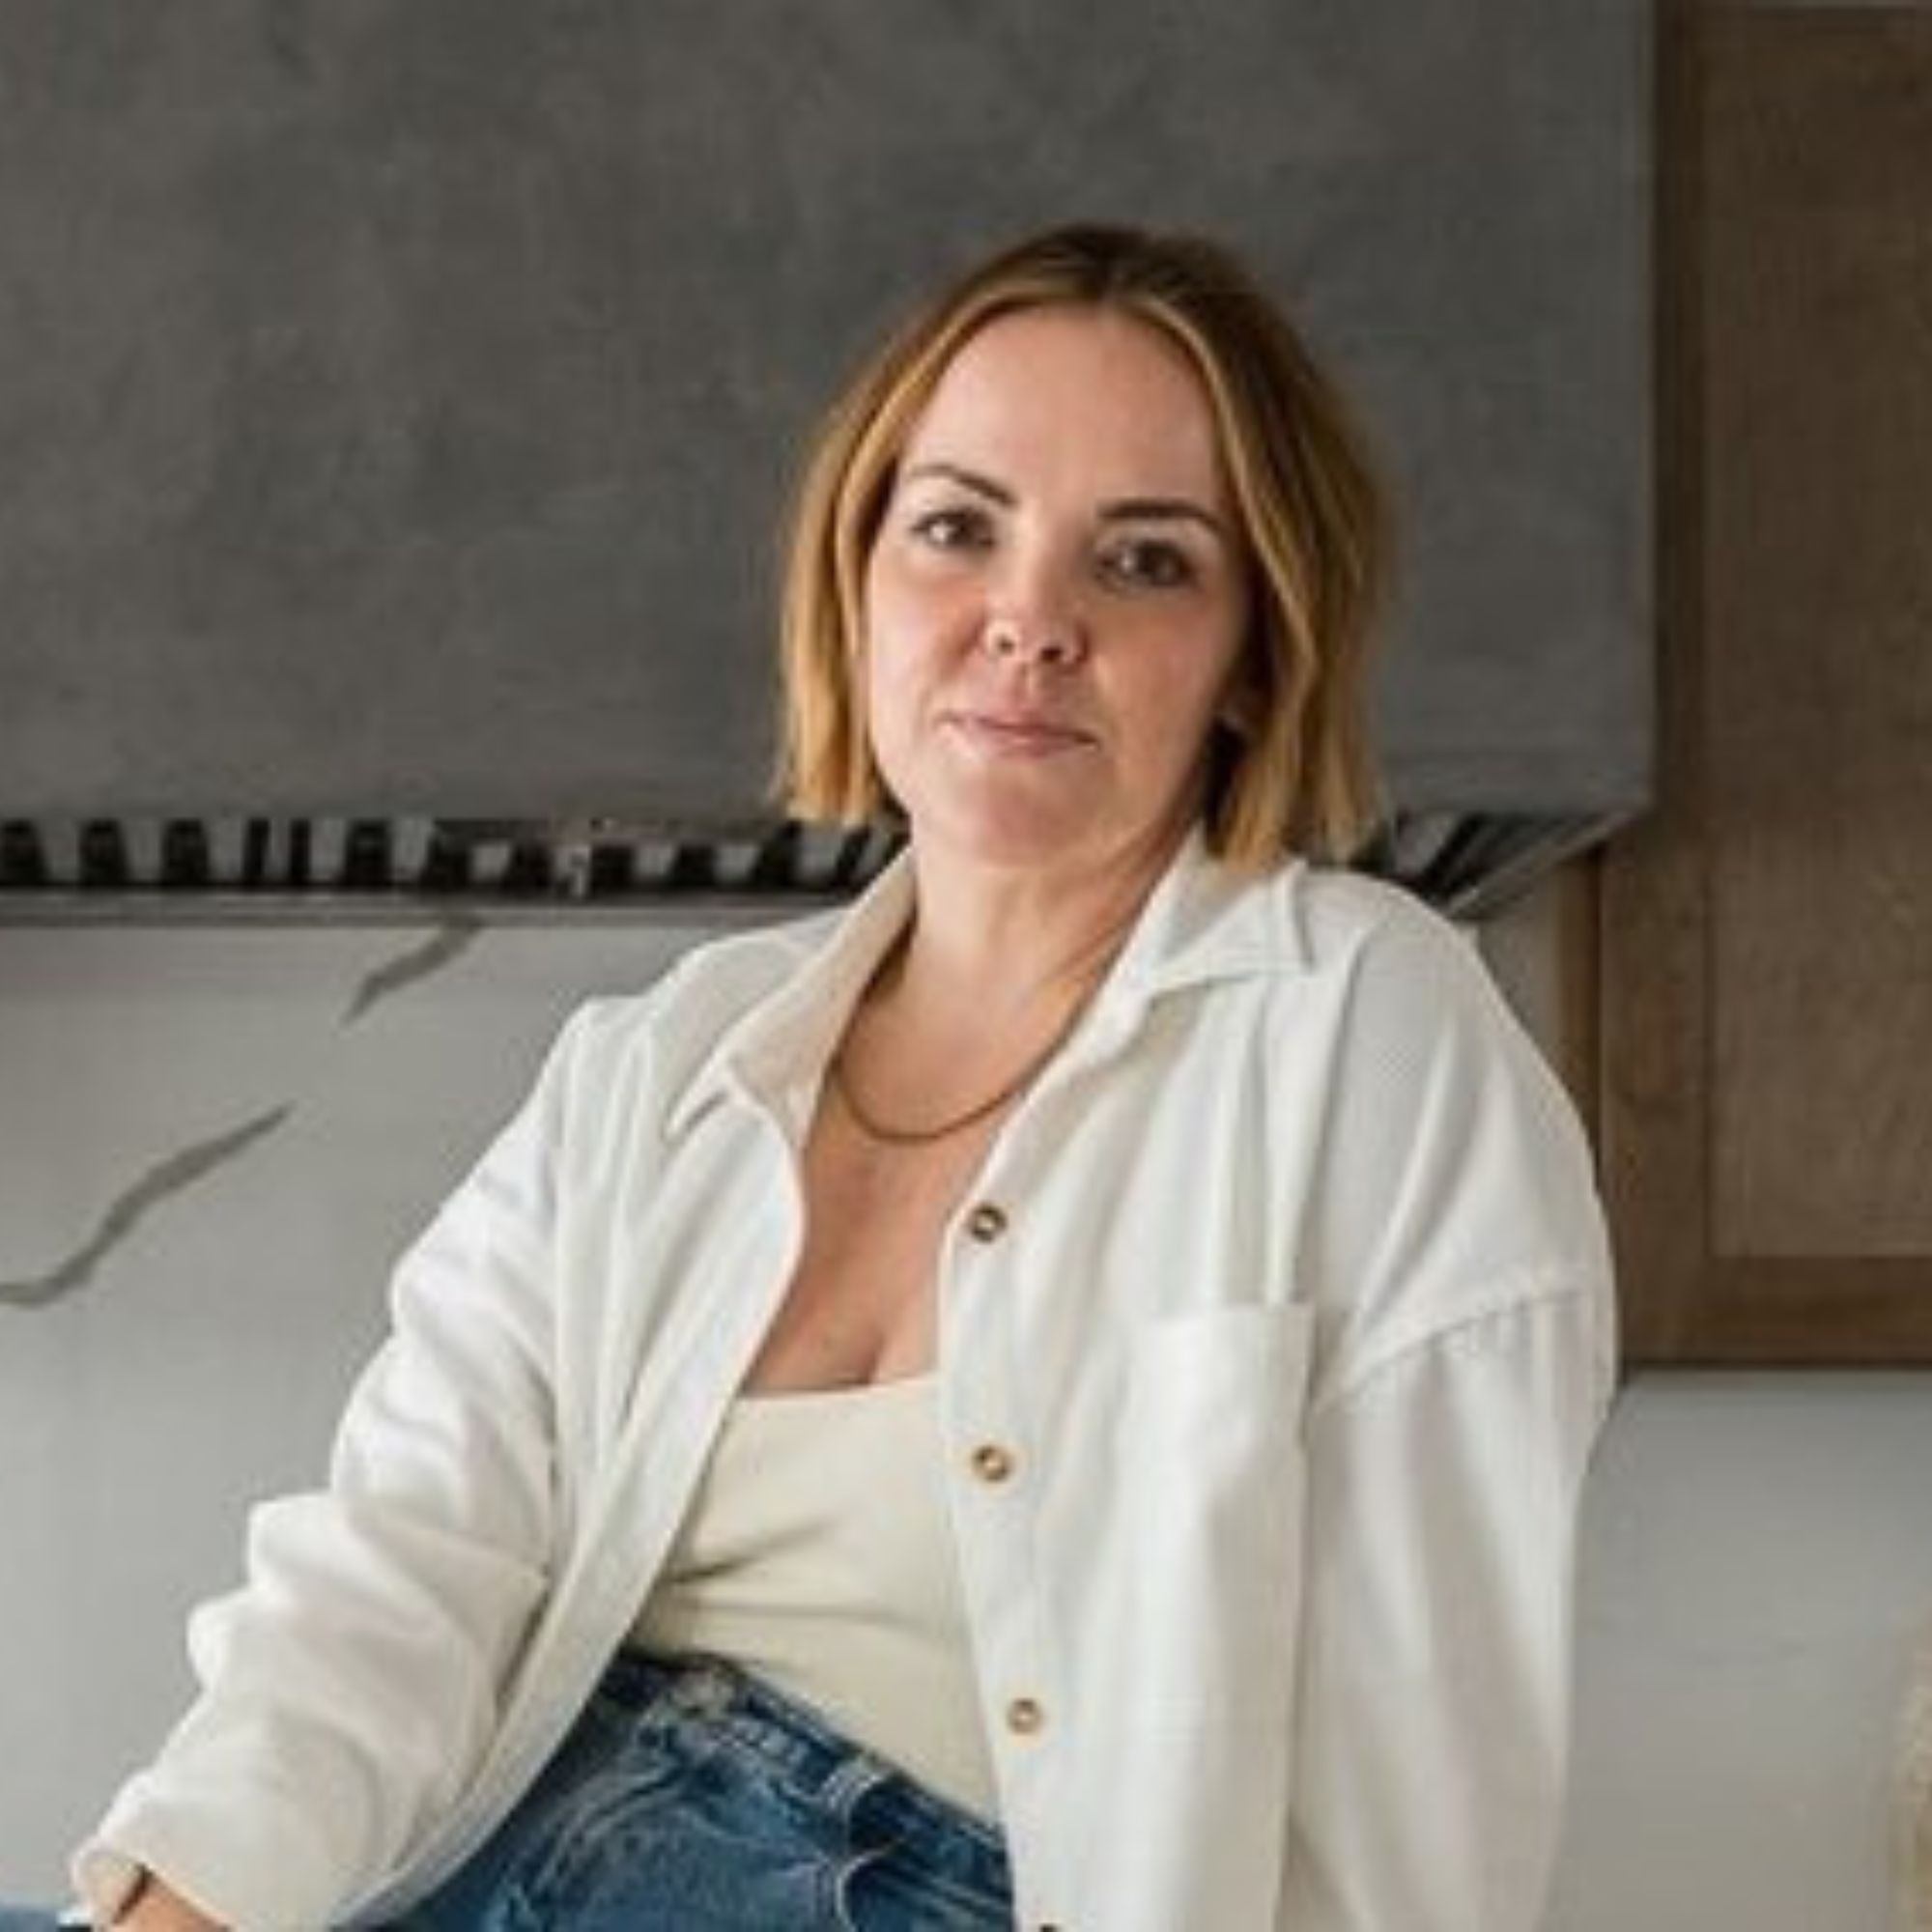 A picture of Heather Knight-Willcock, a woman wearing a white shirt and blue jeans